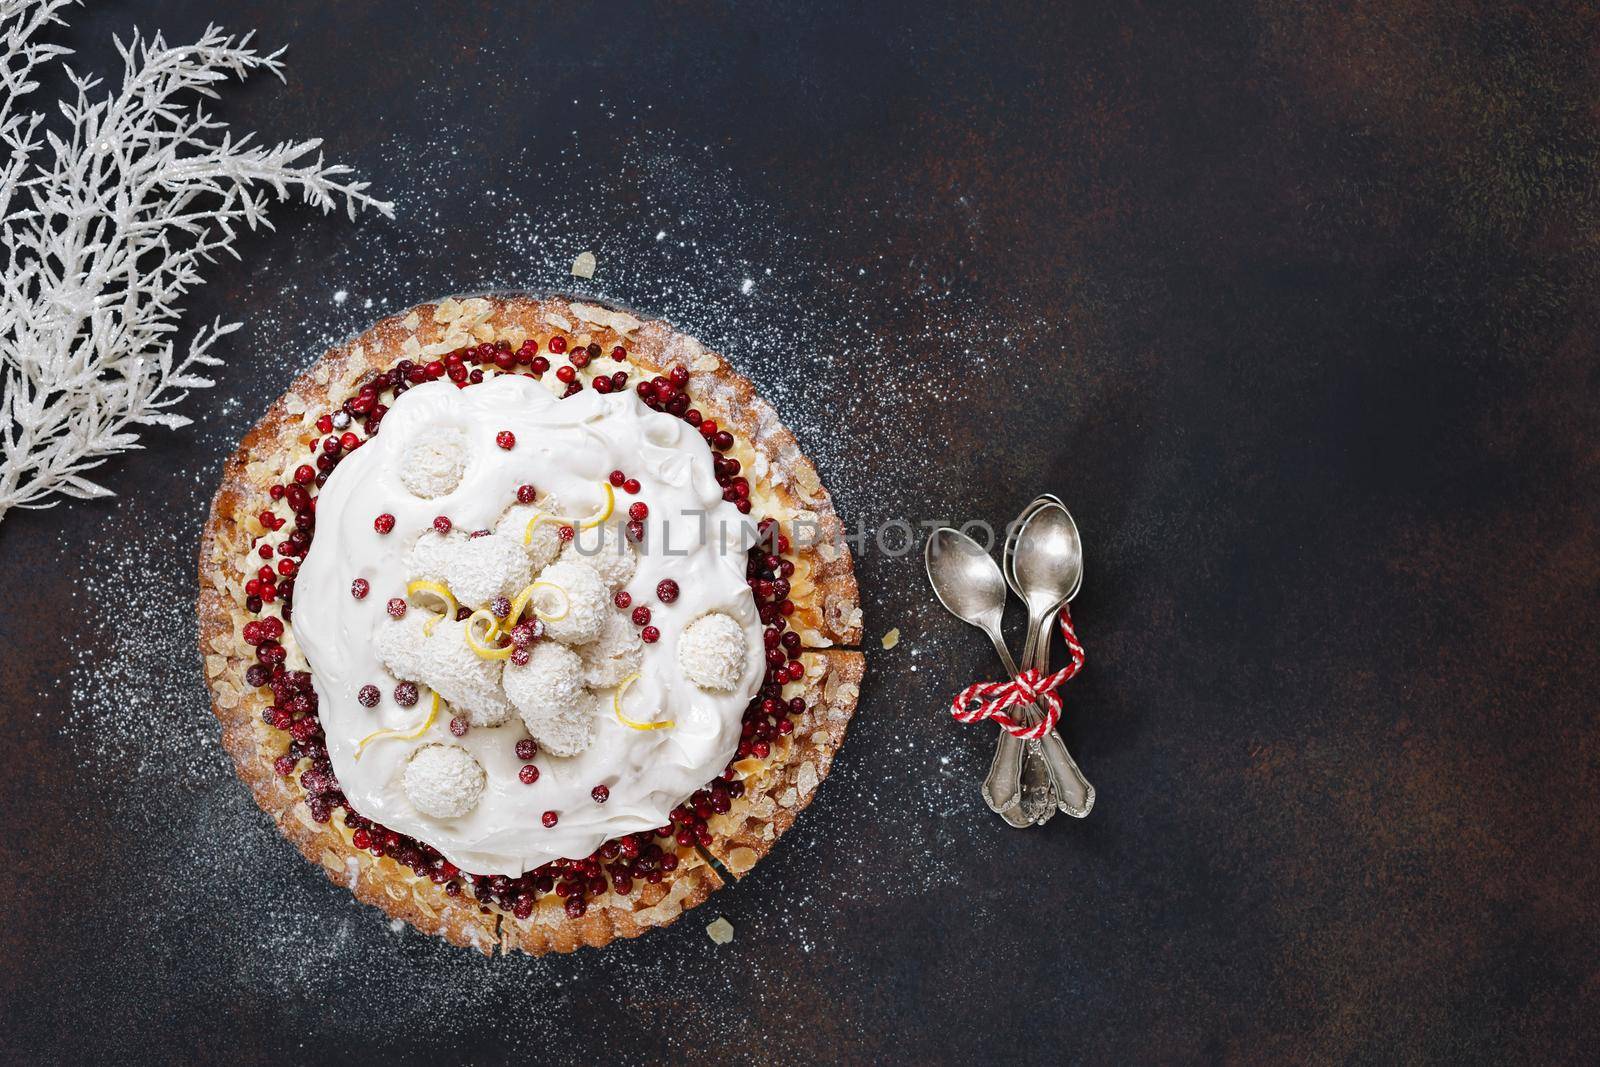 Cranberry tart. Delicious brown butter cranberry tart with fresh cranberries and coconut balls on top. Top view, blank space, rustic background by Slast20